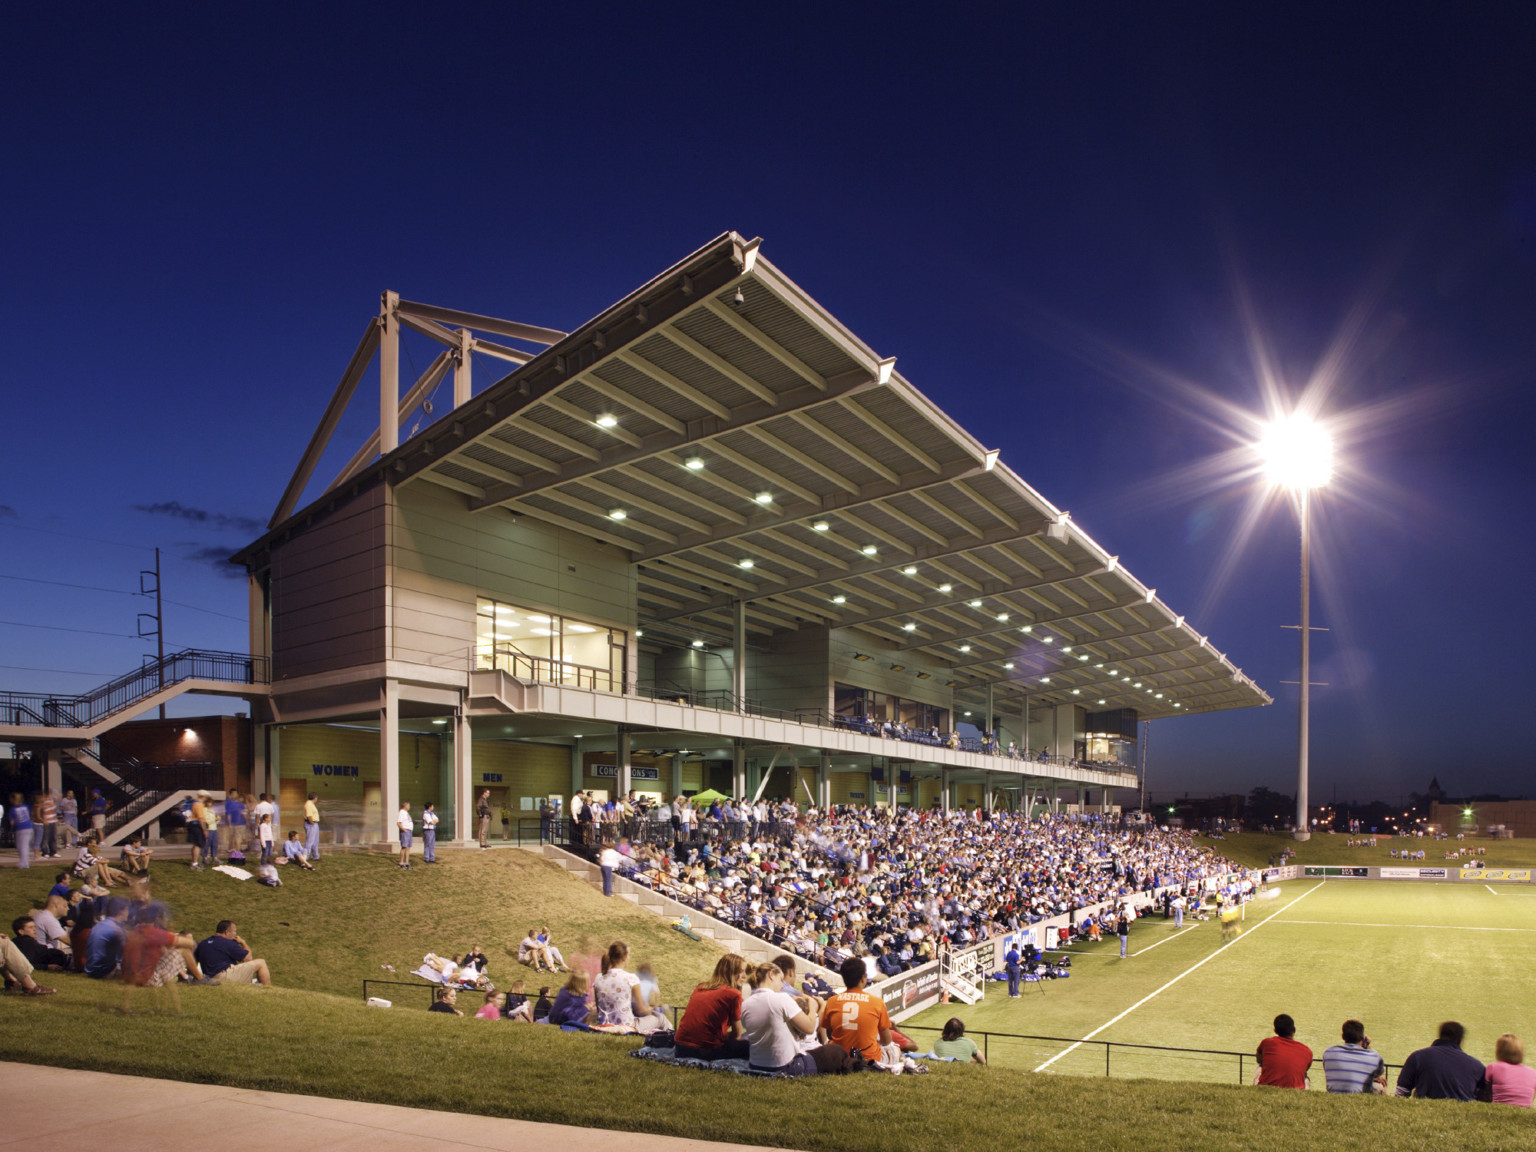 Illuminated canopy extends from roof of elevated grey panel box seating above bleachers. Lawn seating at either end of field